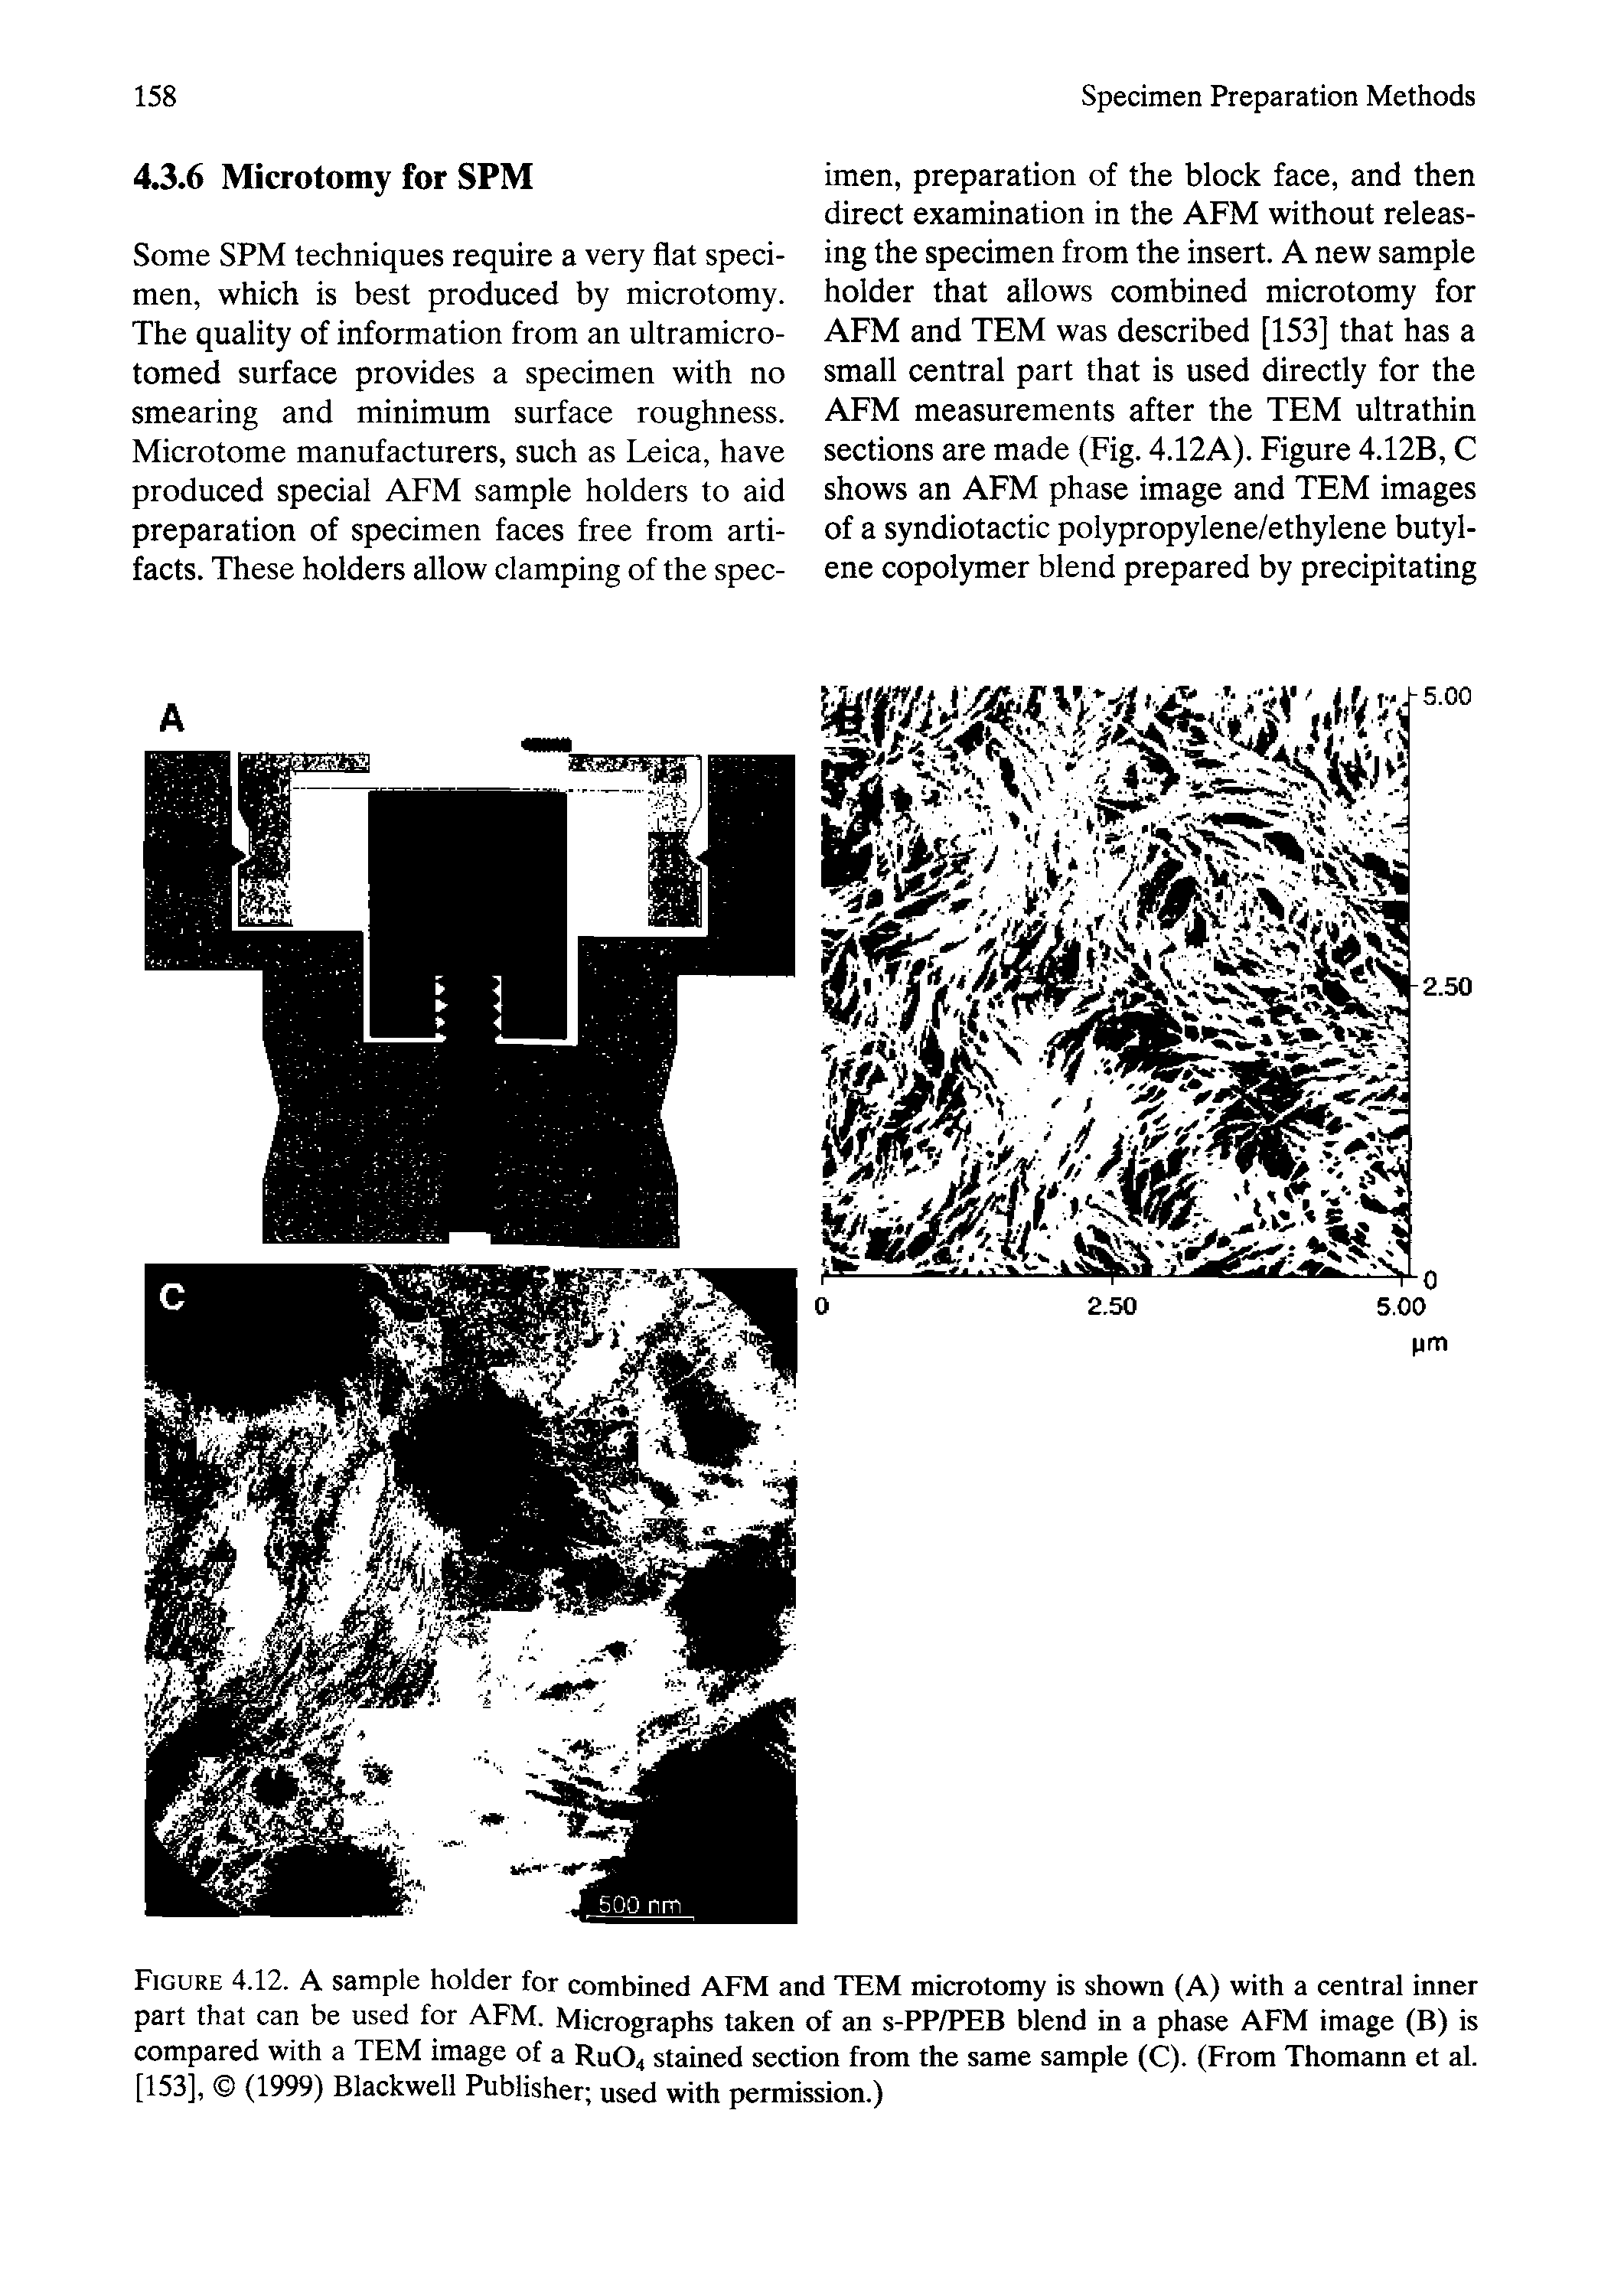 Figure 4.12. A sample holder for combined AFM and TEM microtomy is shown (A) with a central inner part that can be used for AFM. Micrographs taken of an s-PP/PEB blend in a phase AFM image (B) is compared with a TEM image of a RUO4 stained section from the same sample (C). (From Thomann et al. [153], (1999) Blackwell Publisher used with permission.)...